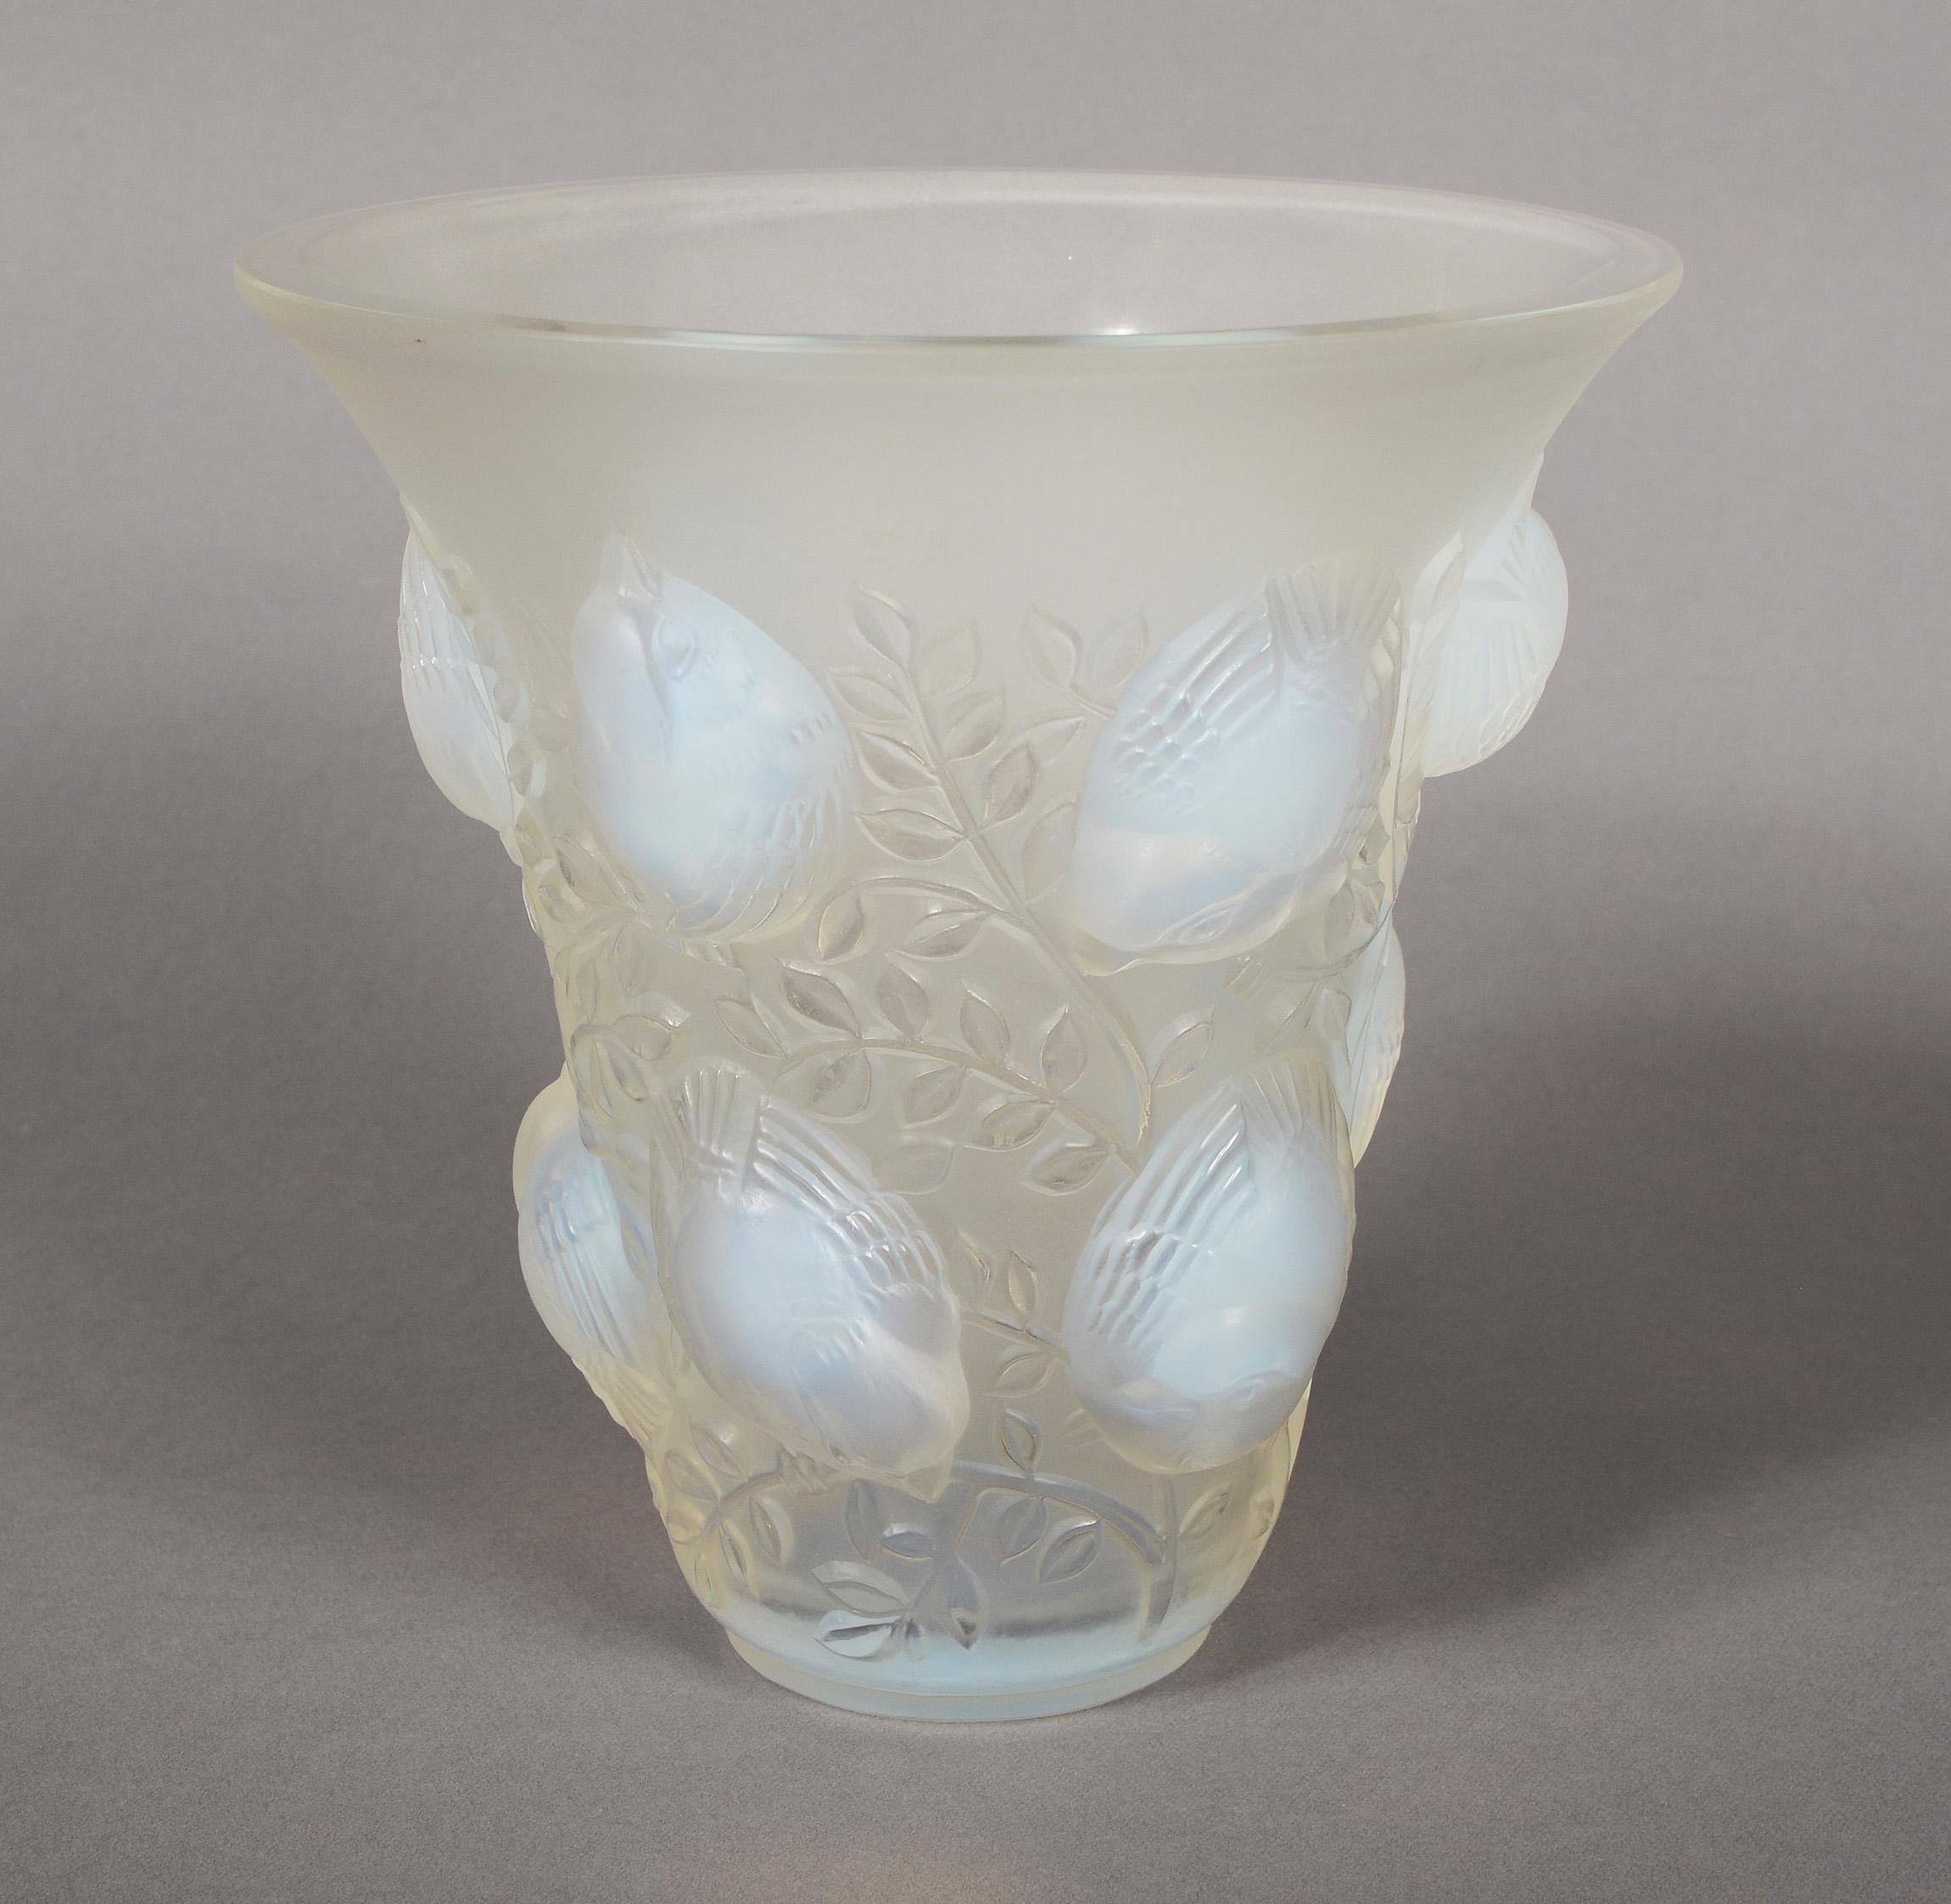 Saint Francois opalescent vase designed by René Lalique, circa 1930. This example dates to circa 1945 just before production ended for this design. The vase is decorated with chubby sparrows on branches. There is a small nick to the side of the rim